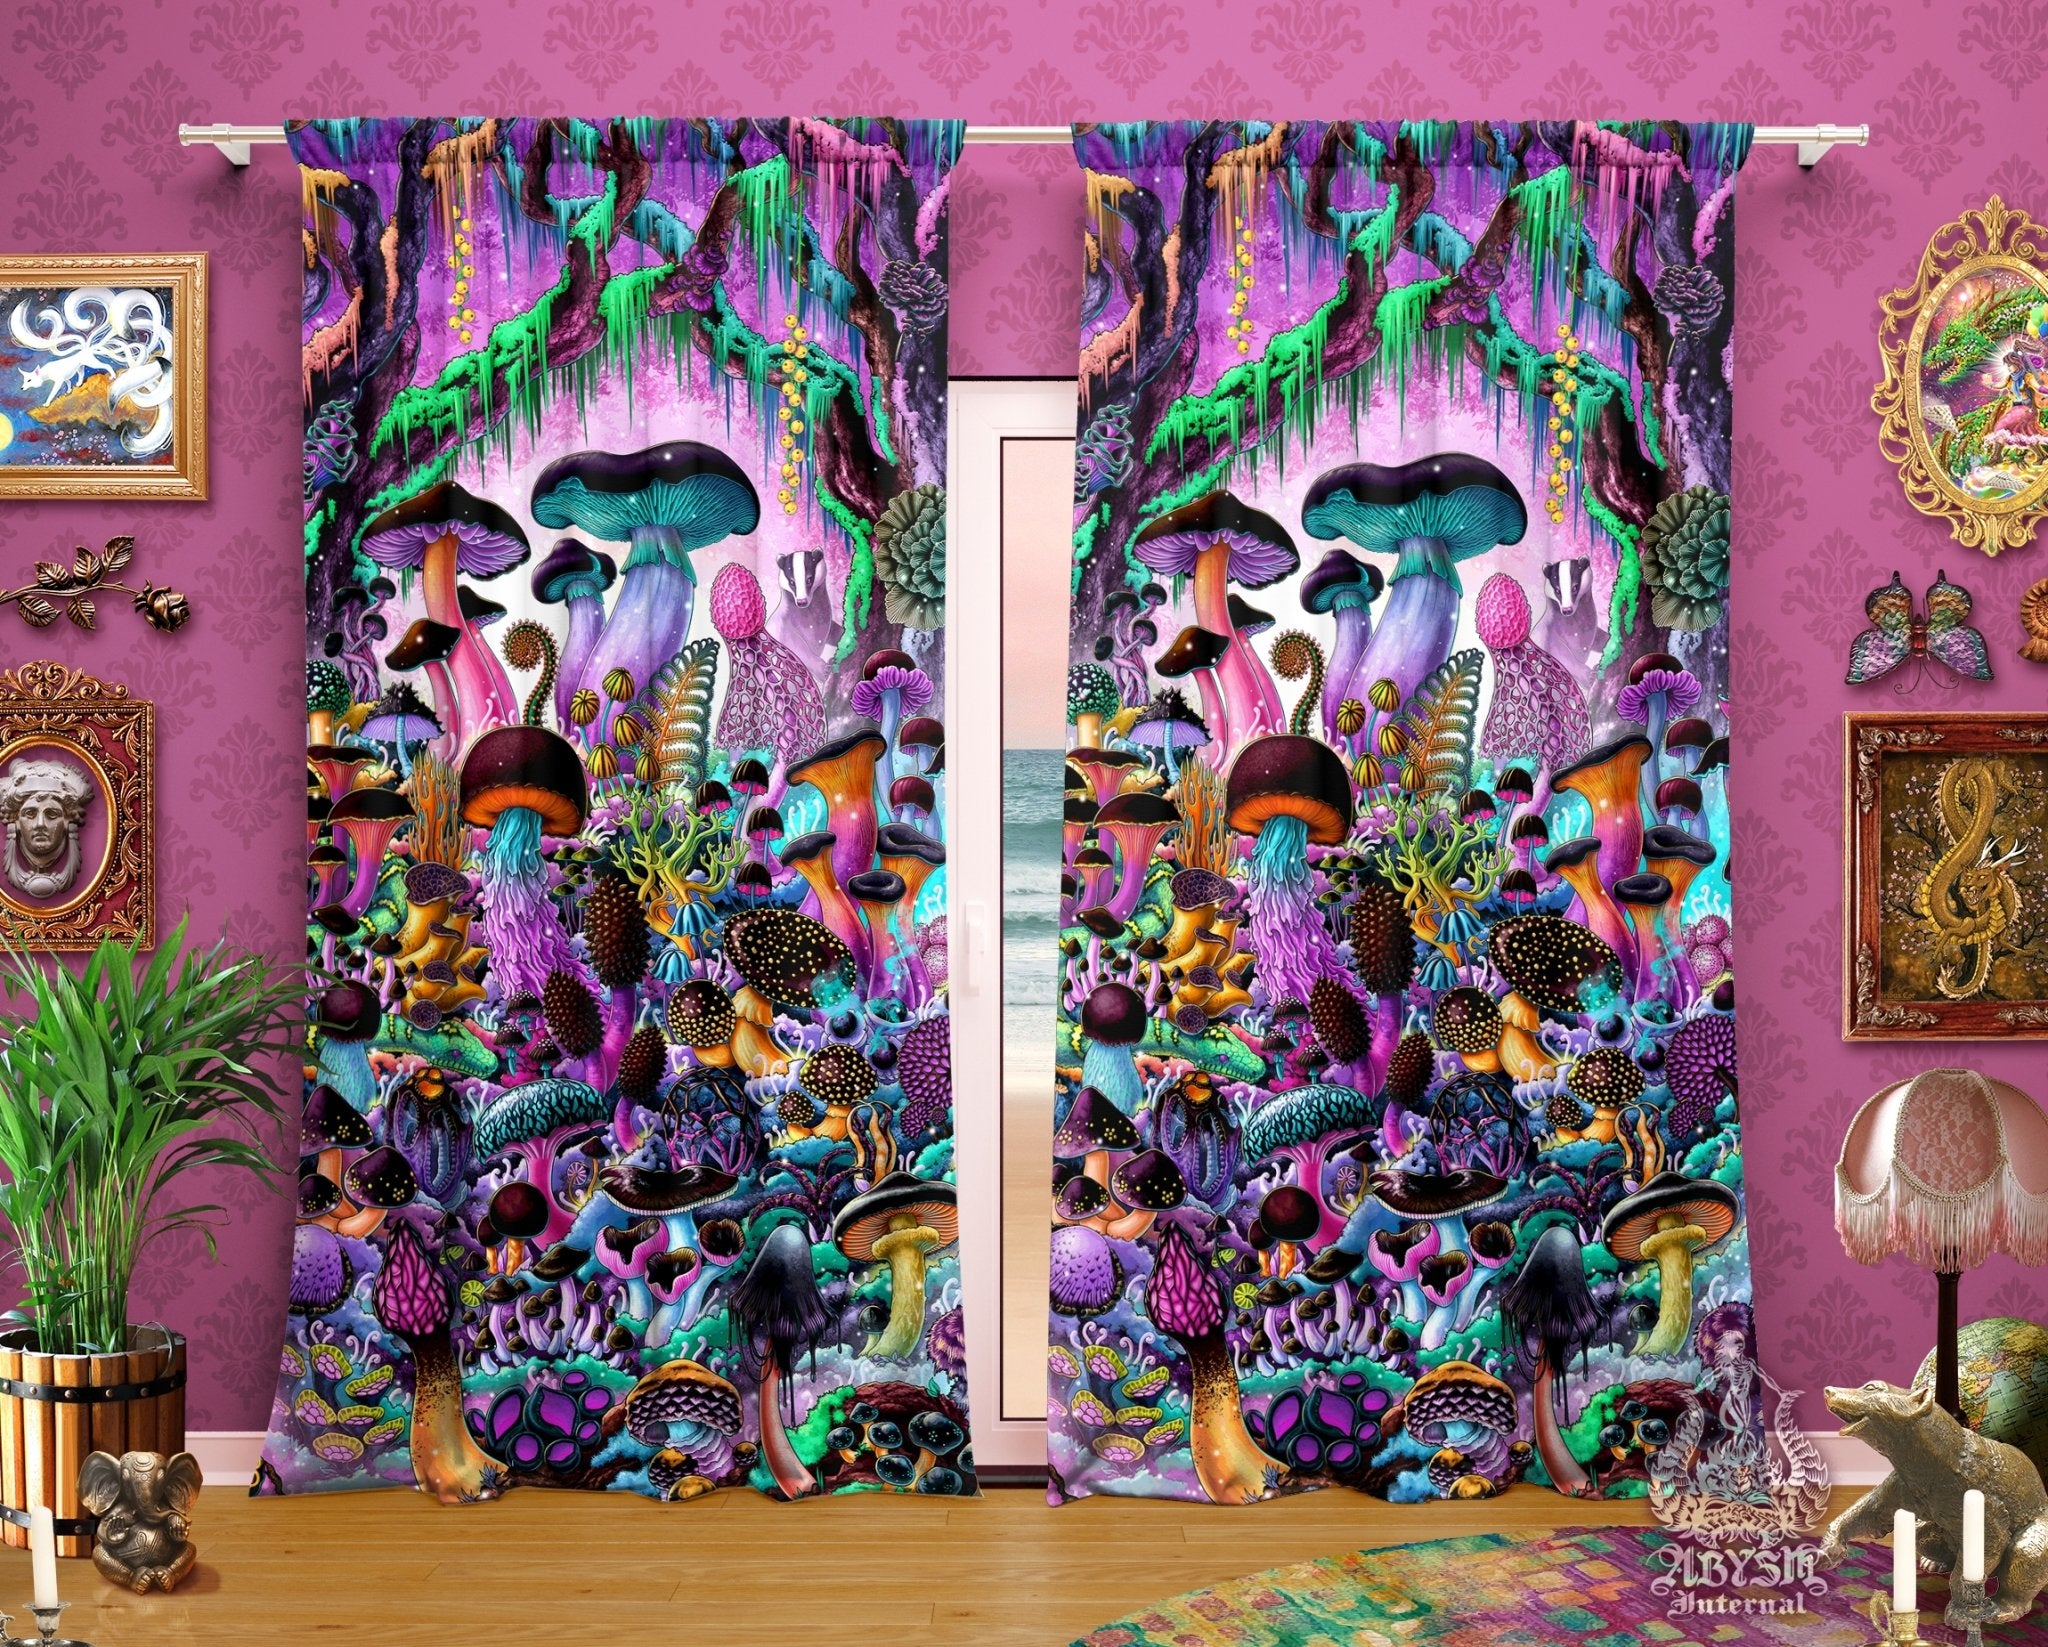 Psychedelic Mushrooms Blackout Curtains, Long Window Panels, Aesthetic Art Print, Girly Kids Room Decor, Gamer Home and Shop Decor - Magic Shrooms, Pastel Black - Abysm Internal